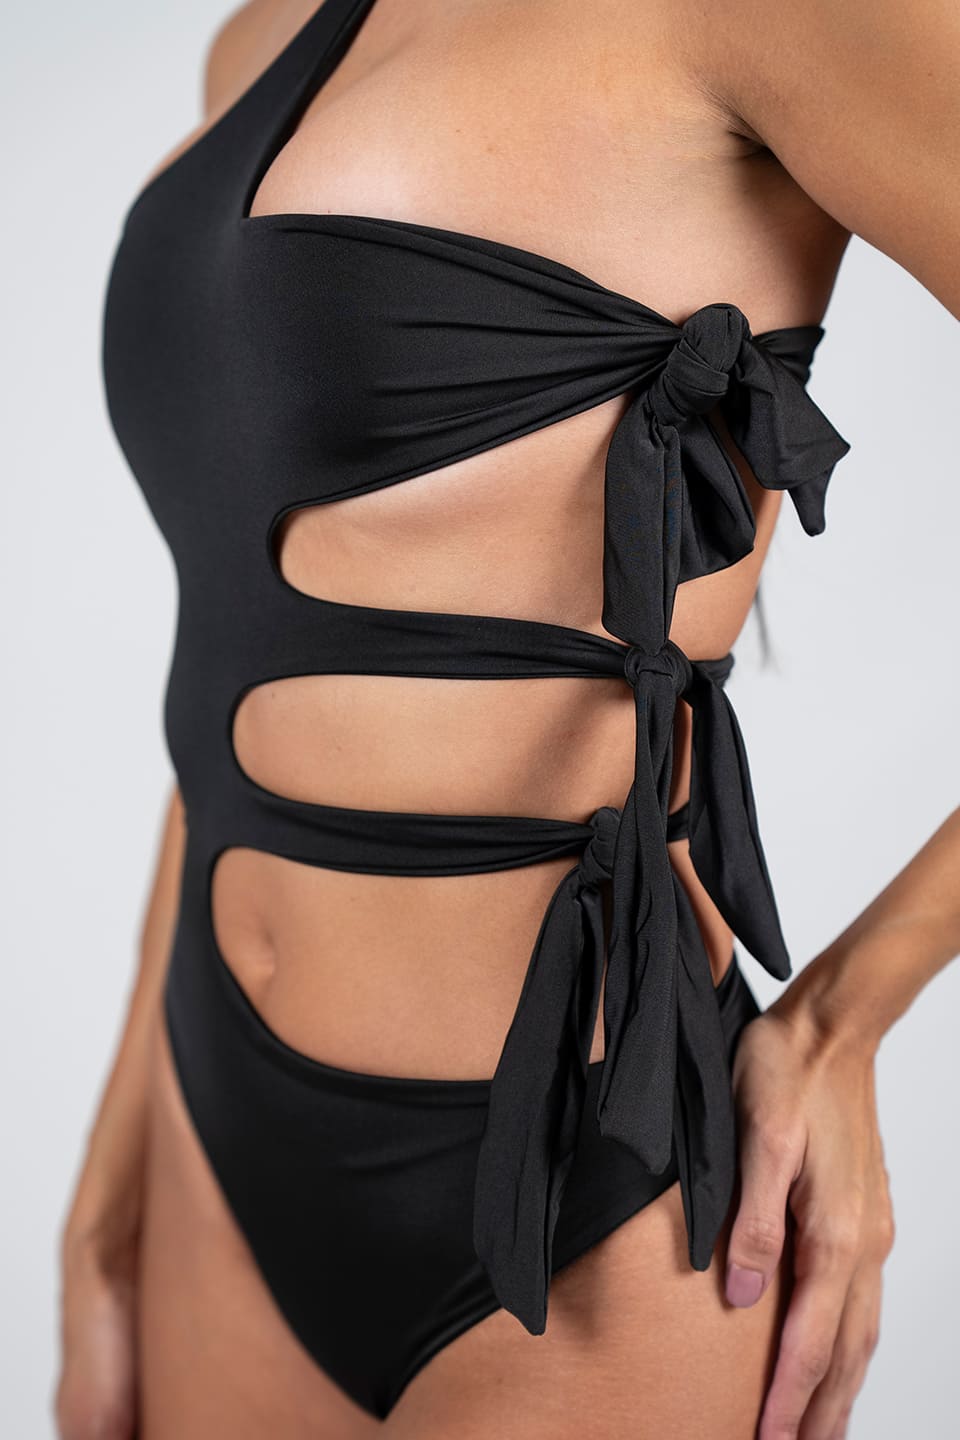 Thumbnail for Product gallery 5, Zina Black Swimsuit